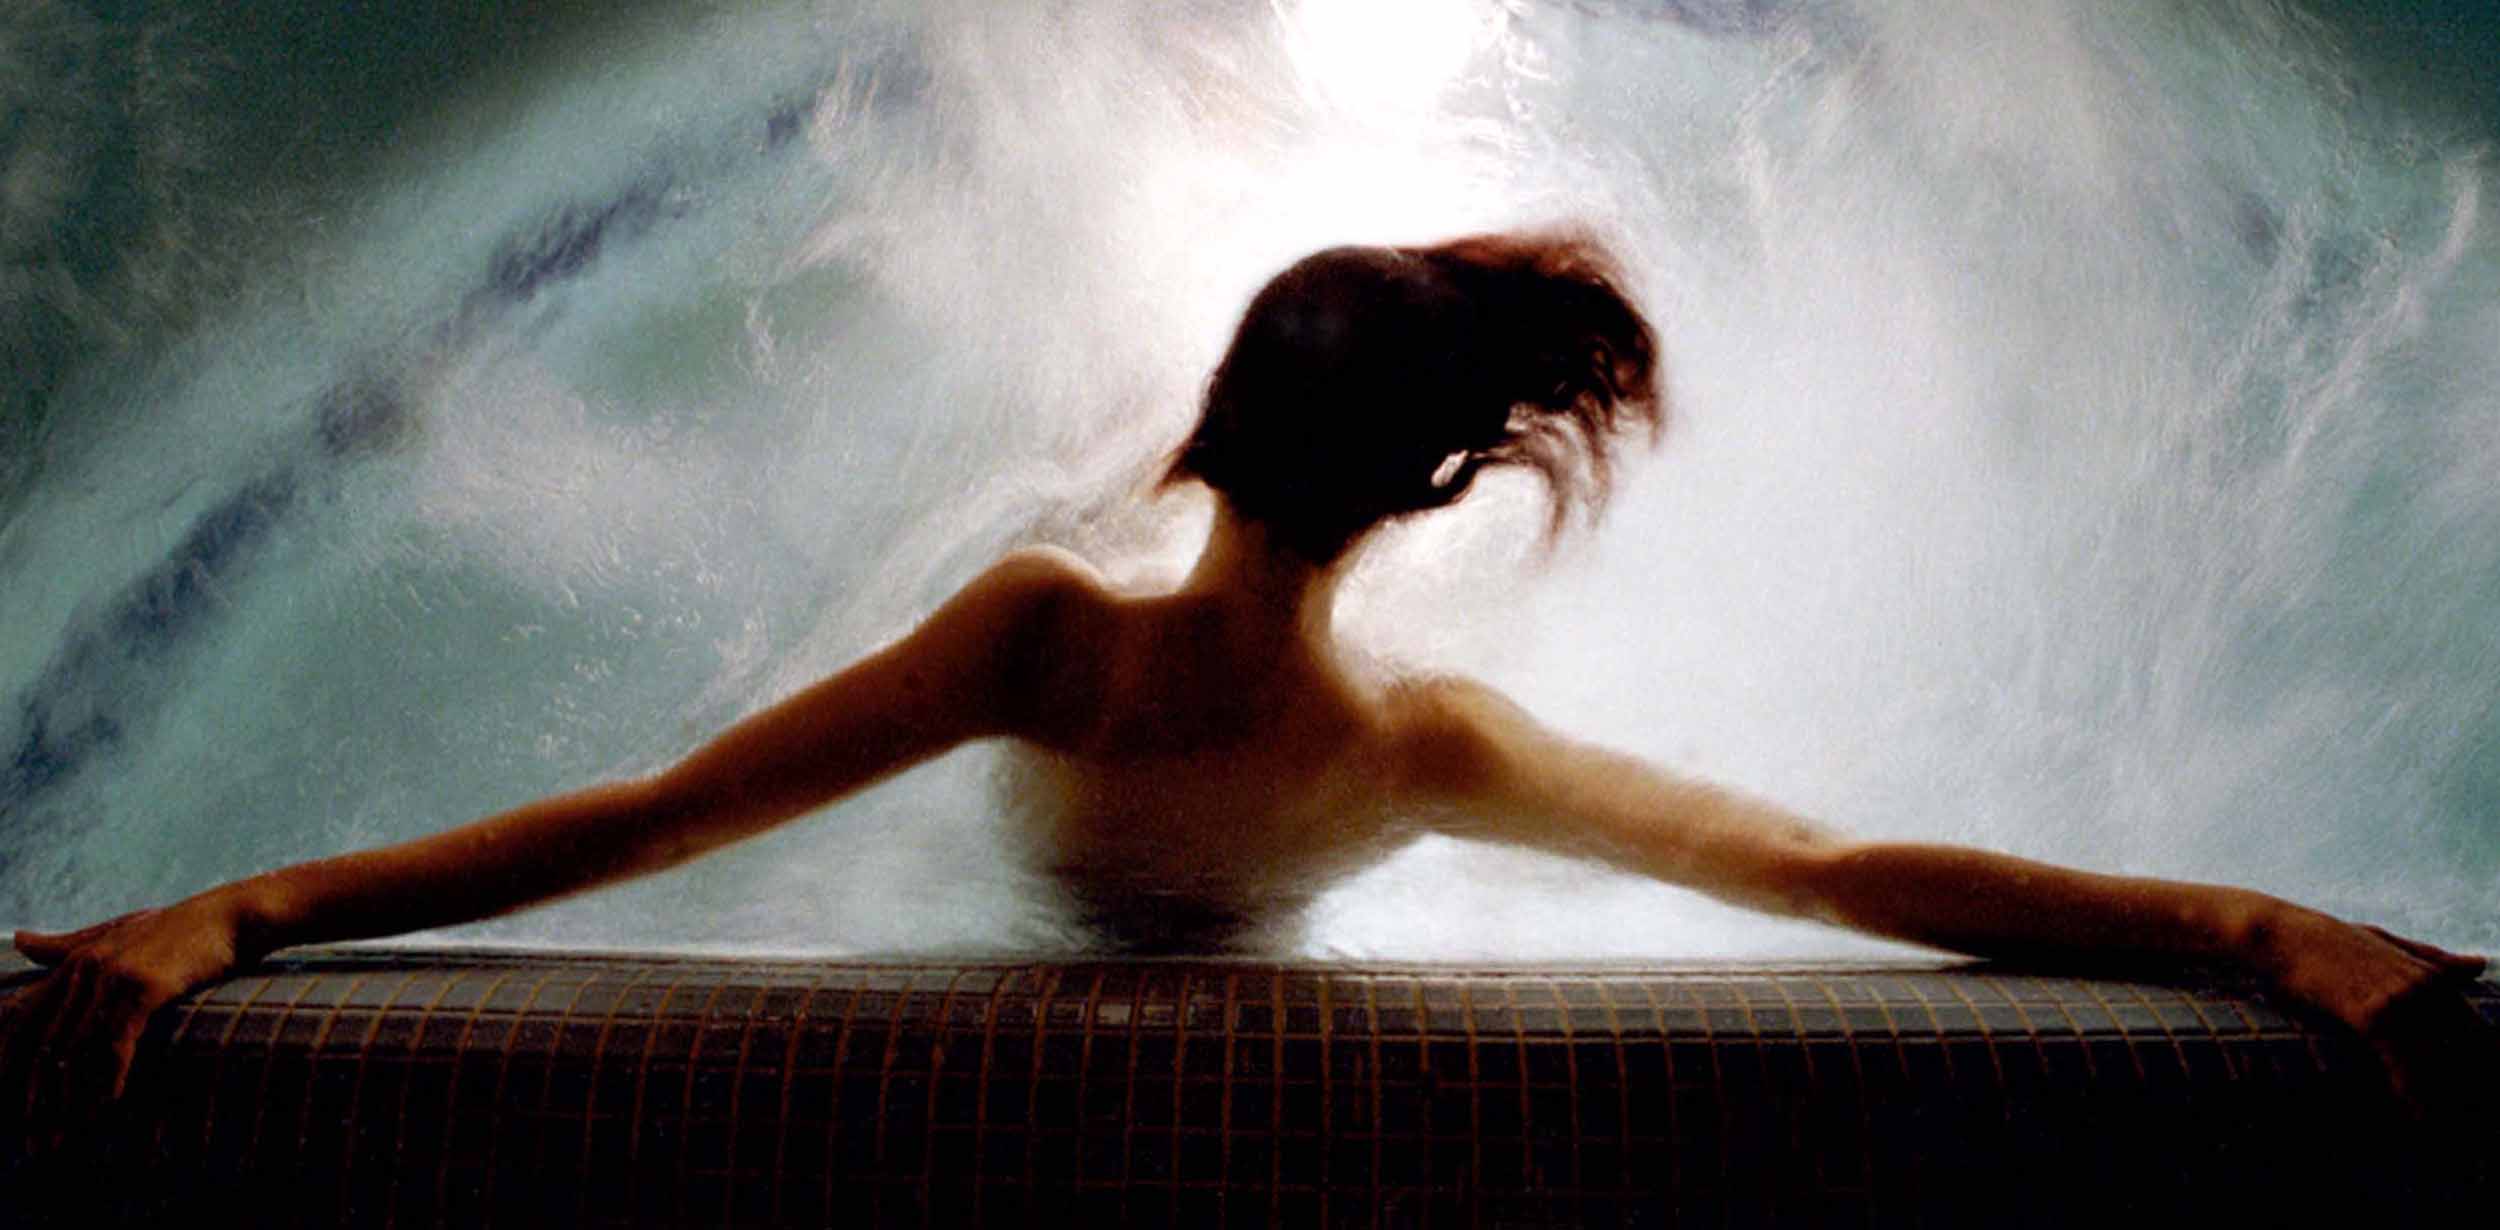 The bather : upon returning from France, Niloufar's project began in the form of secret shootings before ending up as more abstract than first imagined.